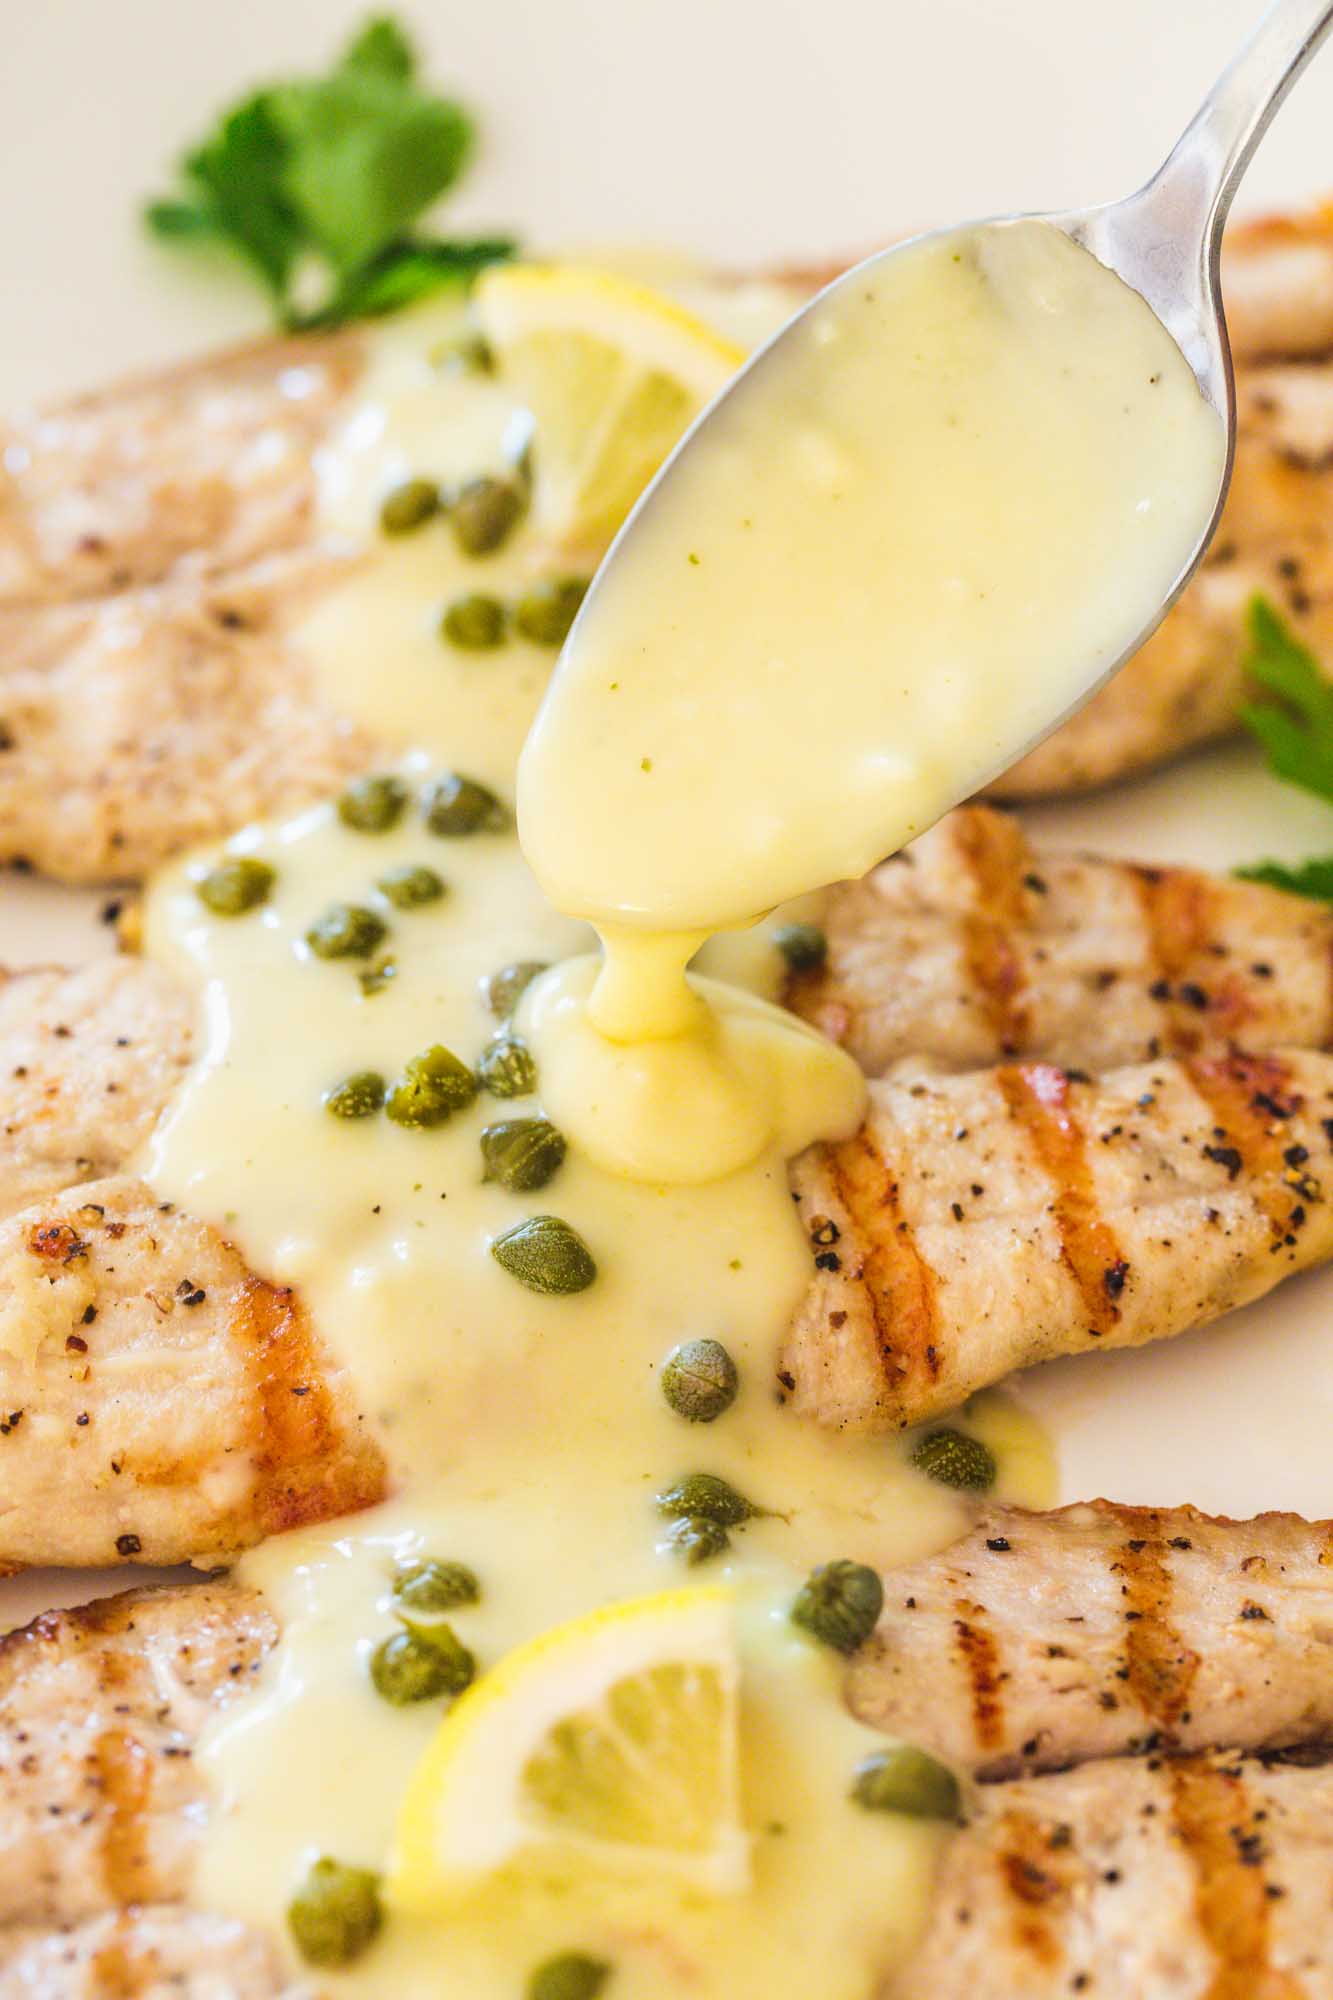 Spooning creamy piccata sauce over grilled tilapia